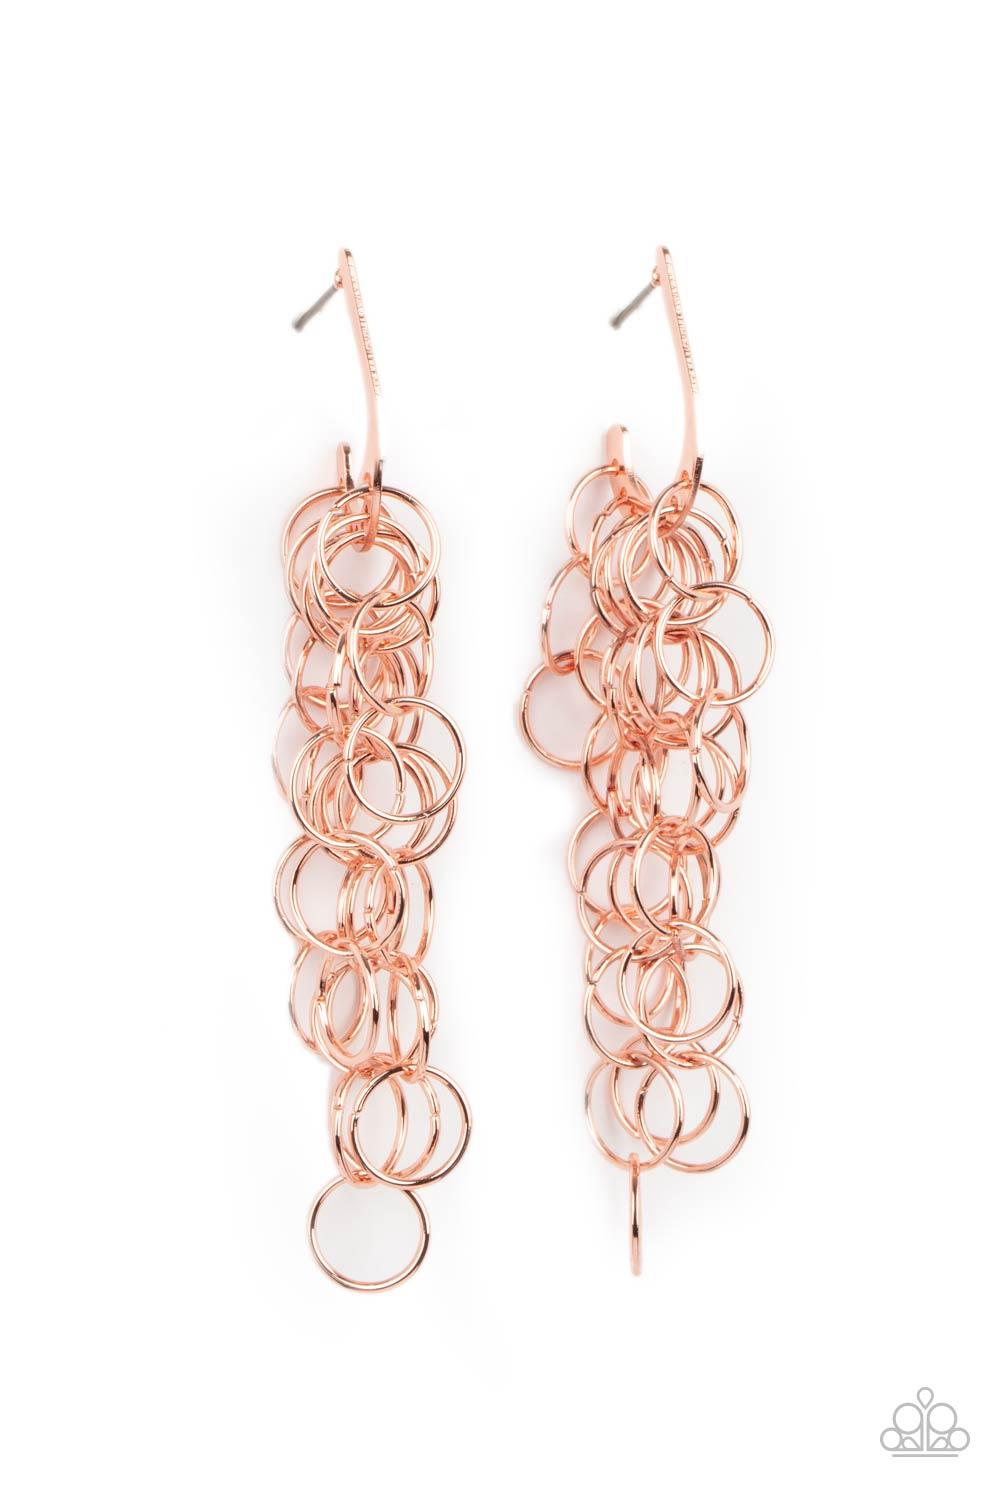 Paparazzi Accessories Long Live The Rebels - Copper Strands of shiny copper links cascade from the bottom of a dainty hook shaped hoop, creating a rebellious fringe. Hoop measures approximately 1/2" in diameter. Earring attaches to a standard post fitting